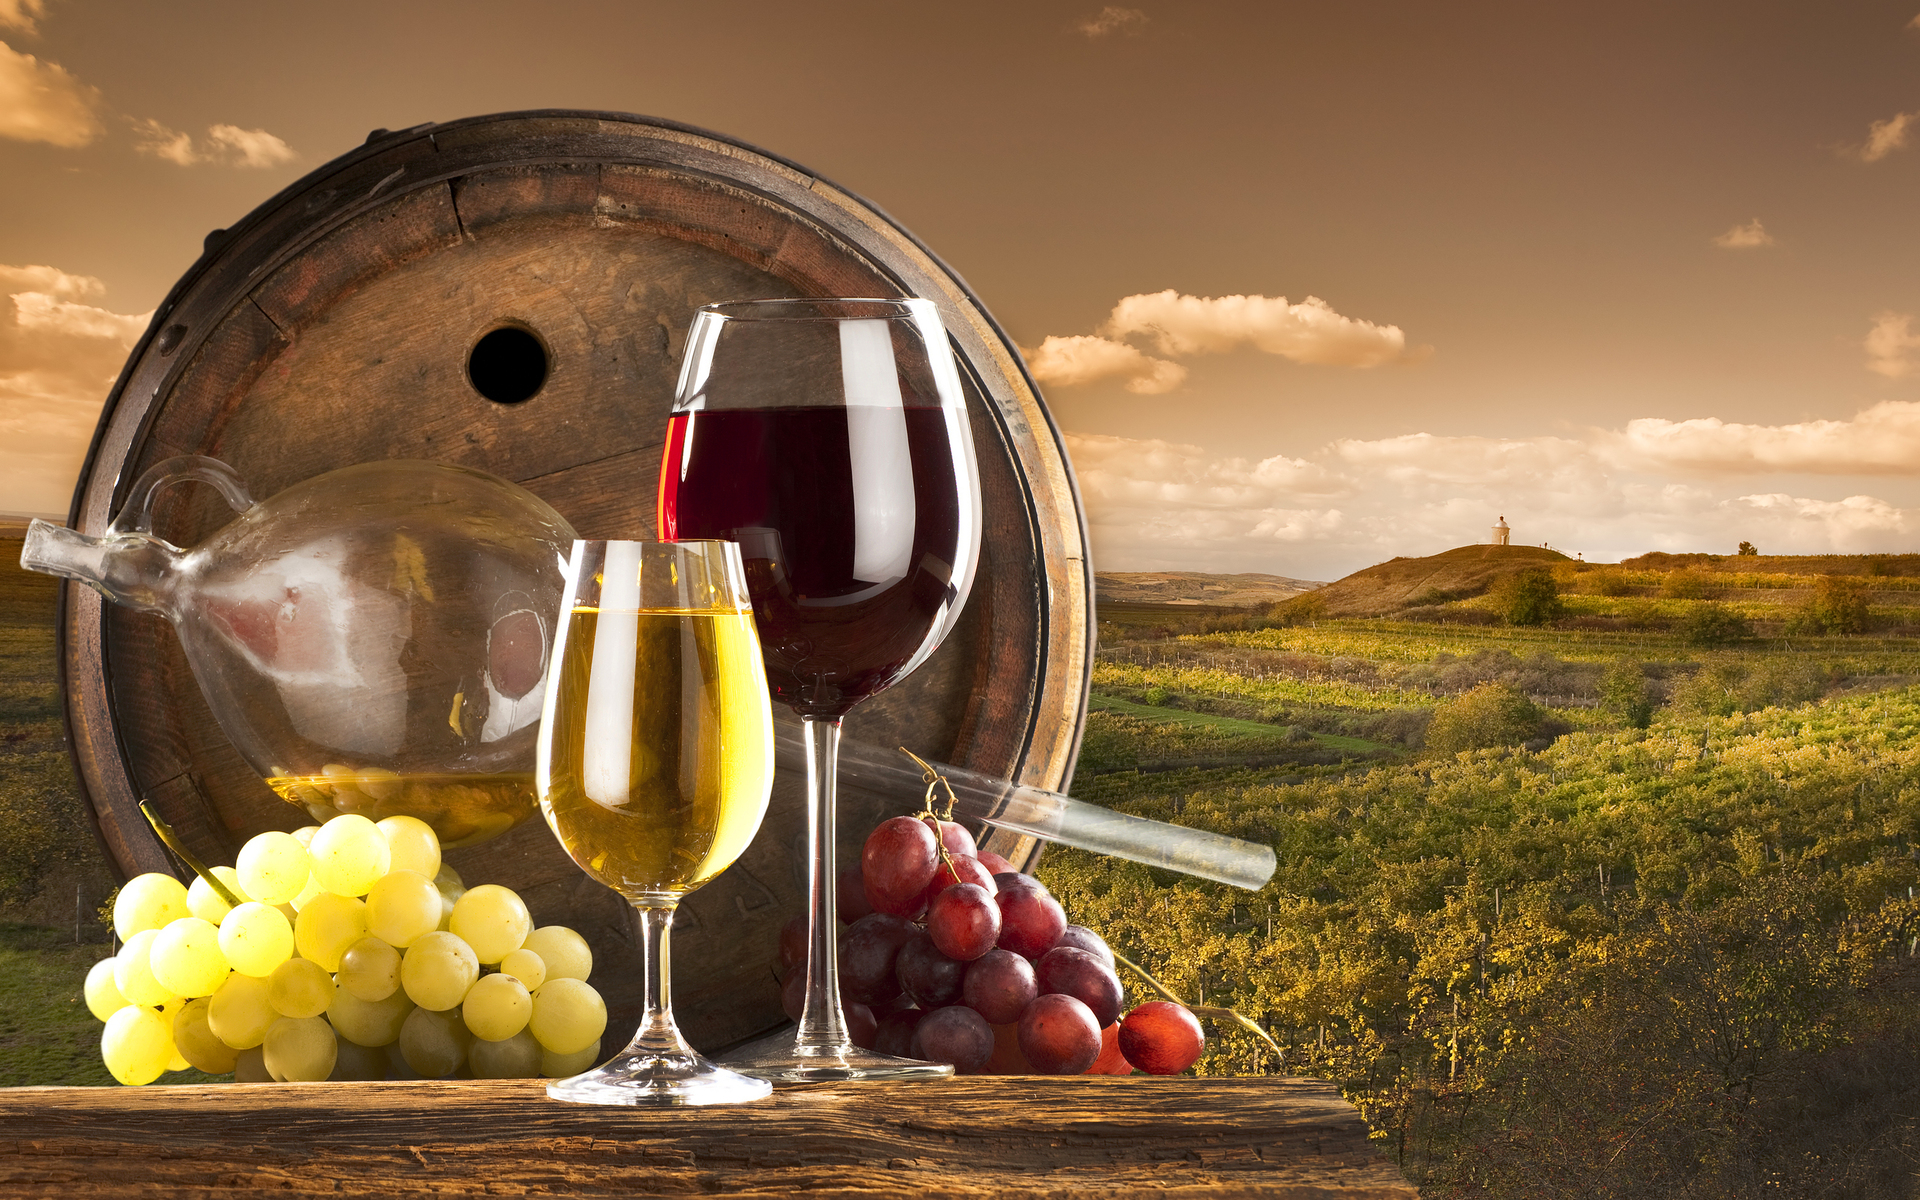   71297617stock photo red and white wine with barrel on vineyardhtml 1920x1200